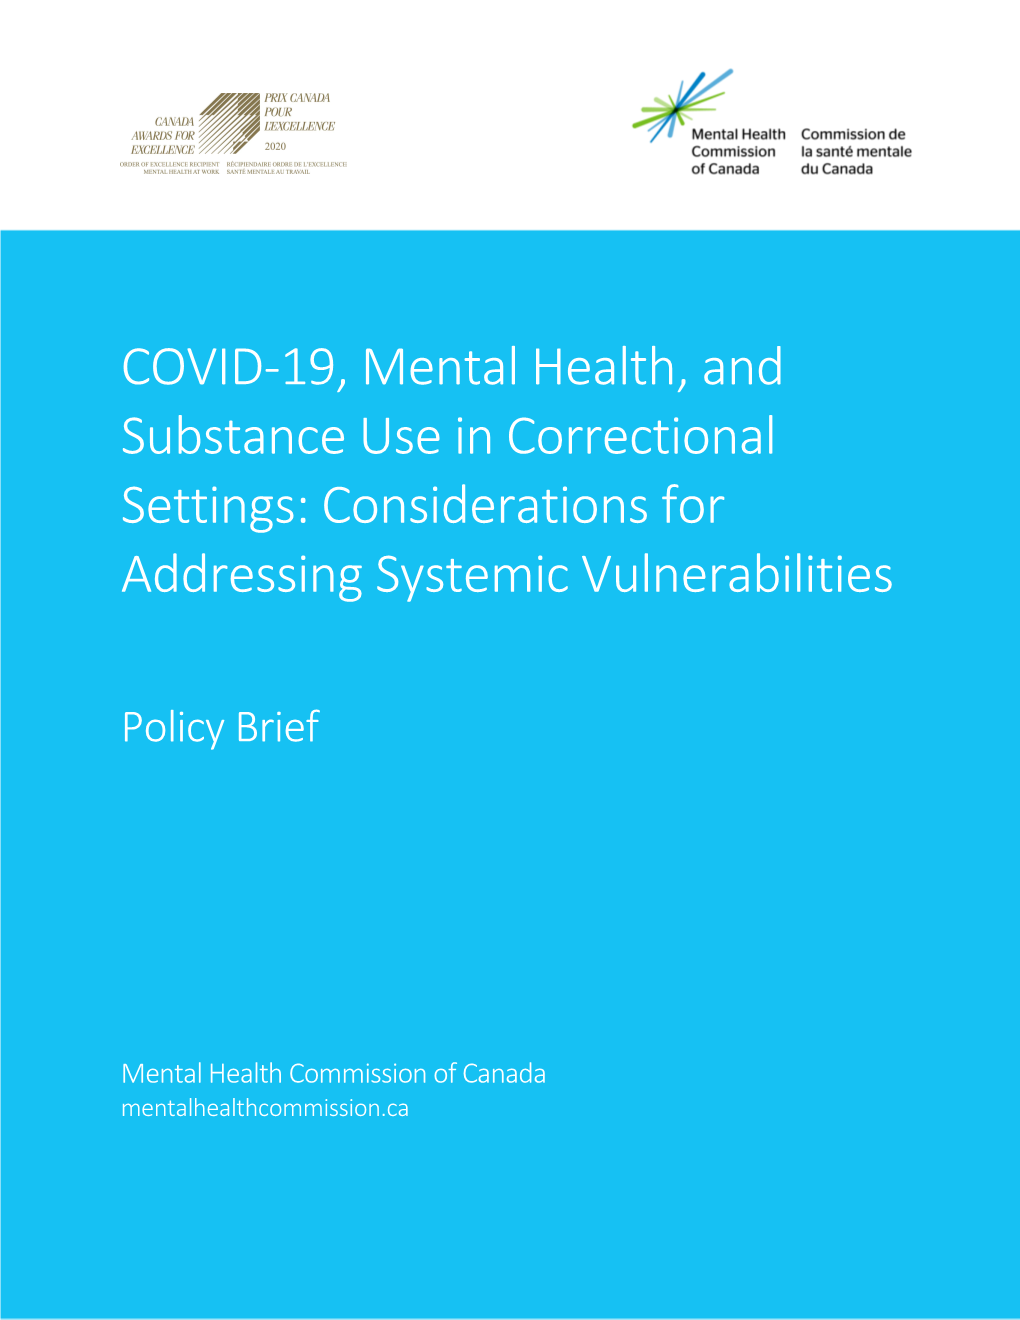 COVID-19, Mental Health, and Substance Use in Correctional Settings: Considerations for Addressing Systemic Vulnerabilities